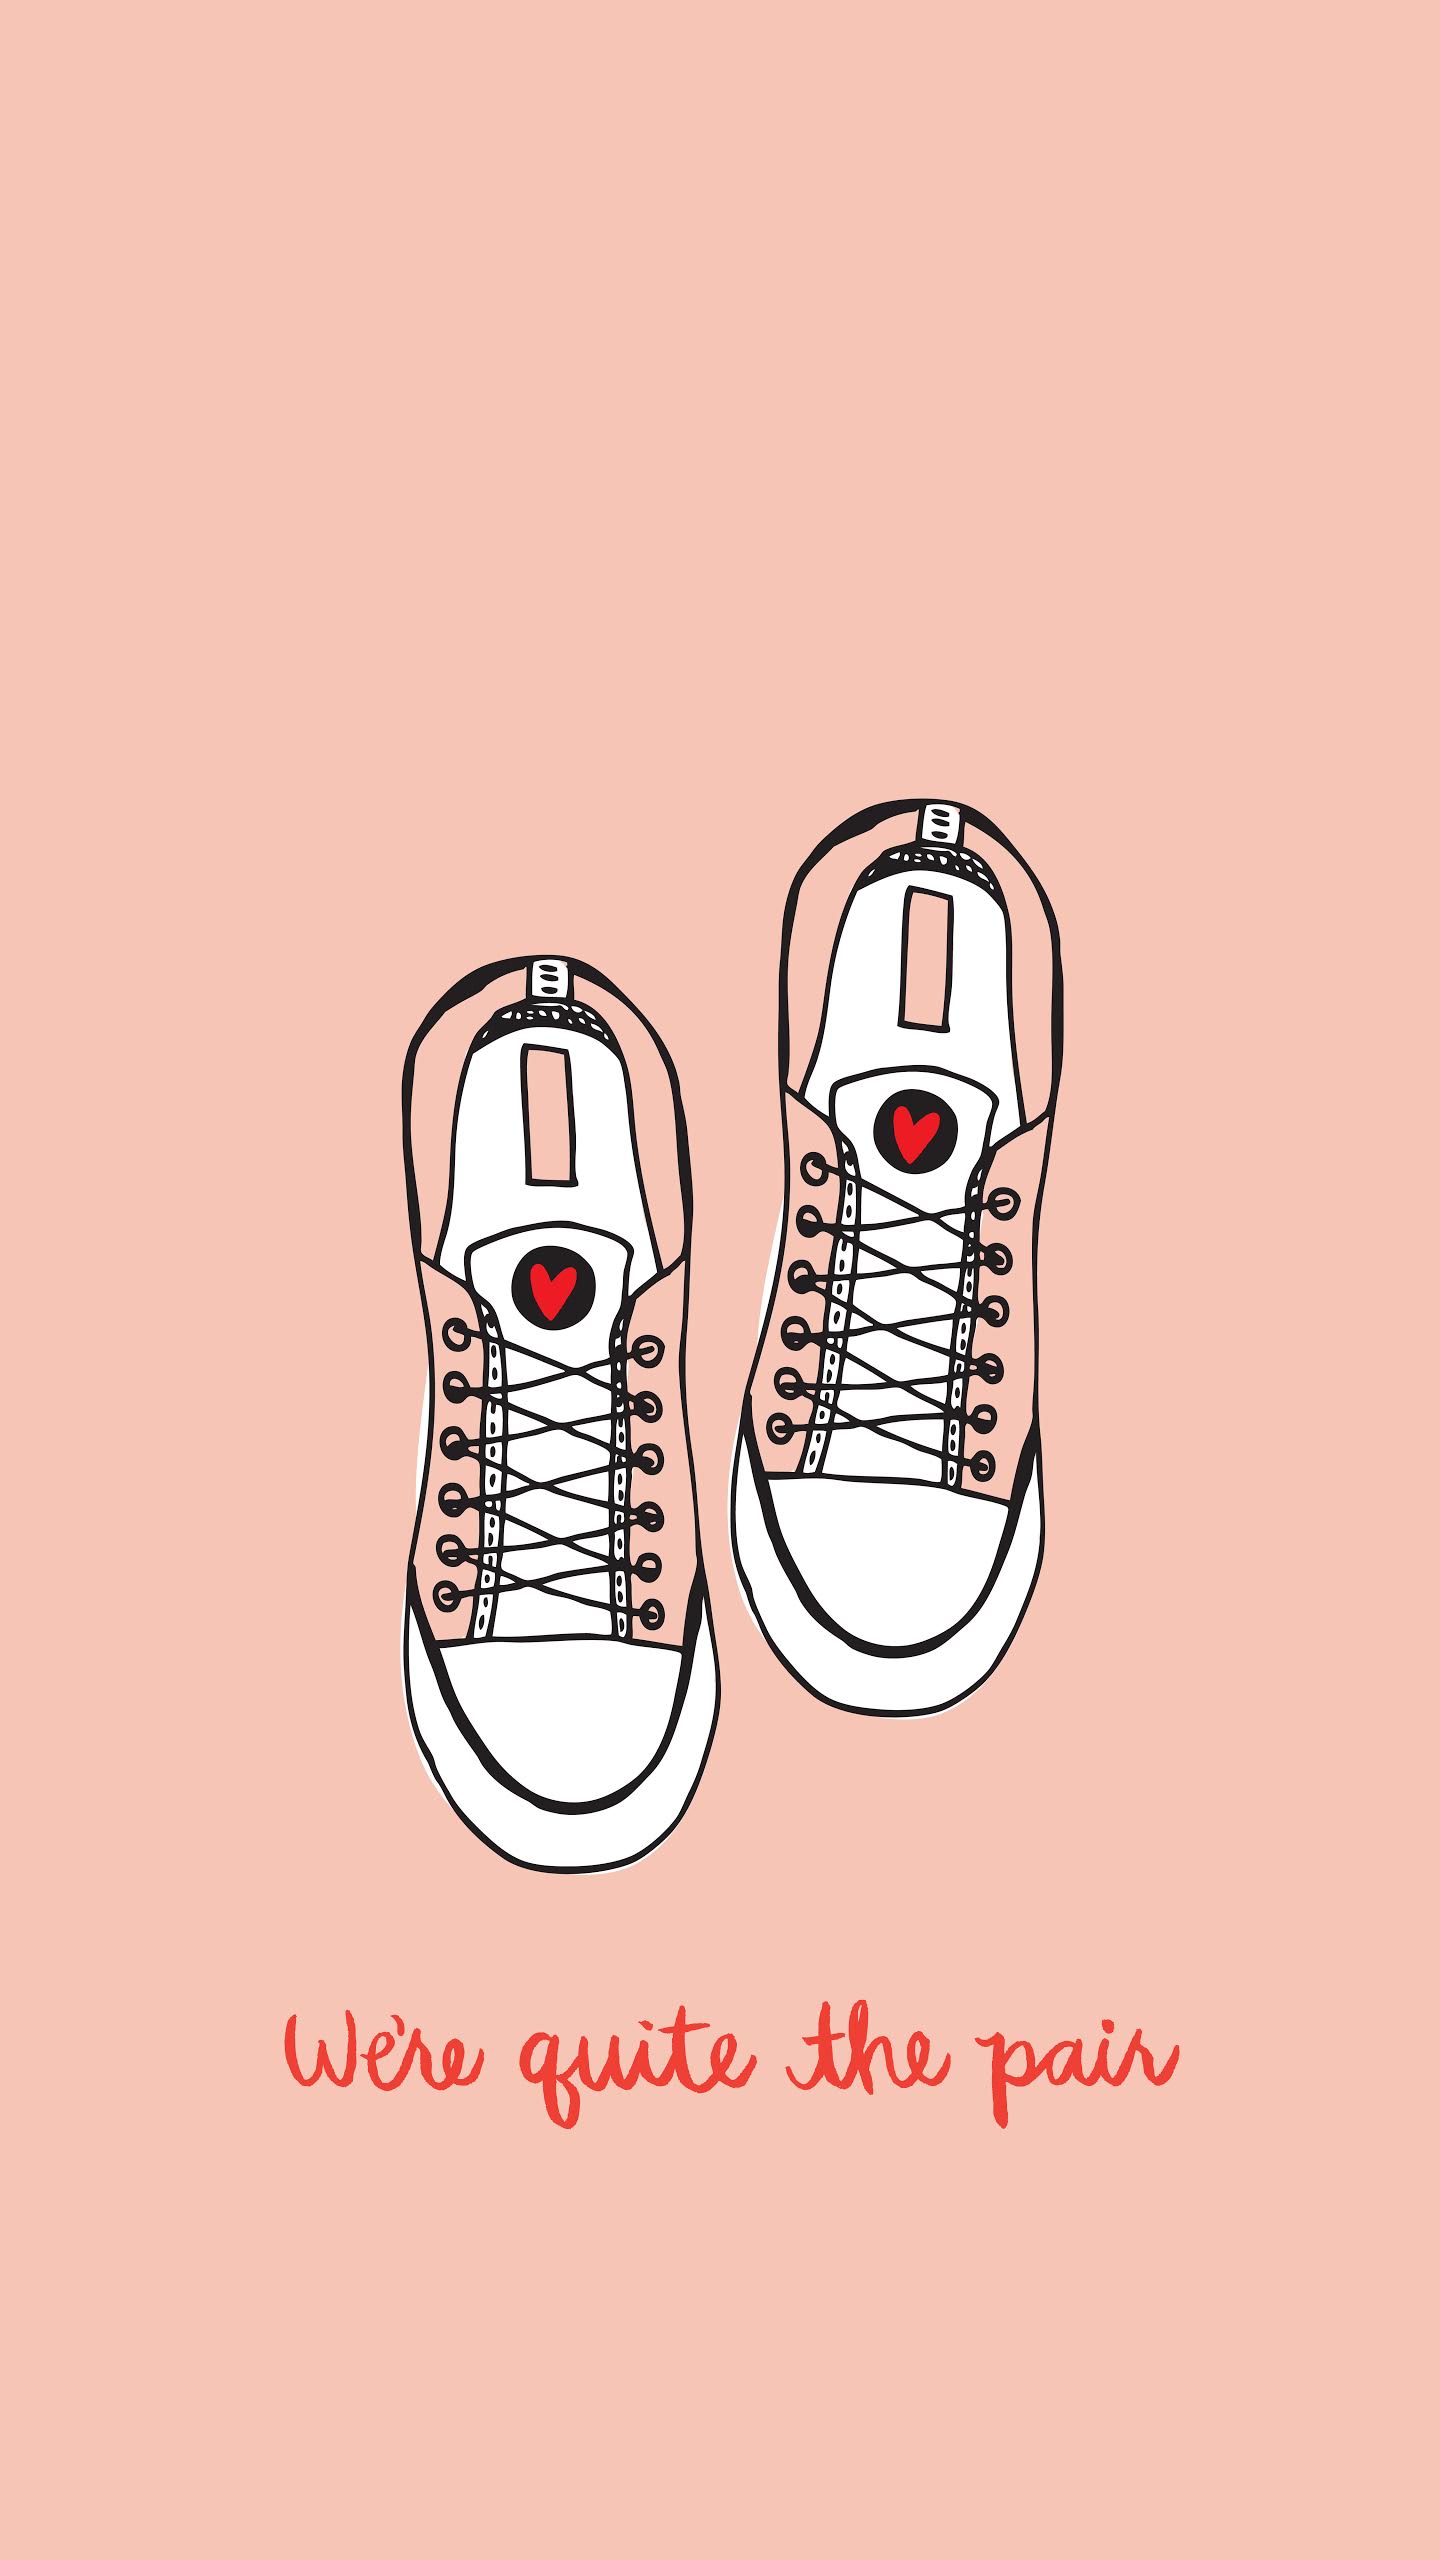 Were quite the pair, cute illustration of a pair of shoes with a heart - Valentine's Day